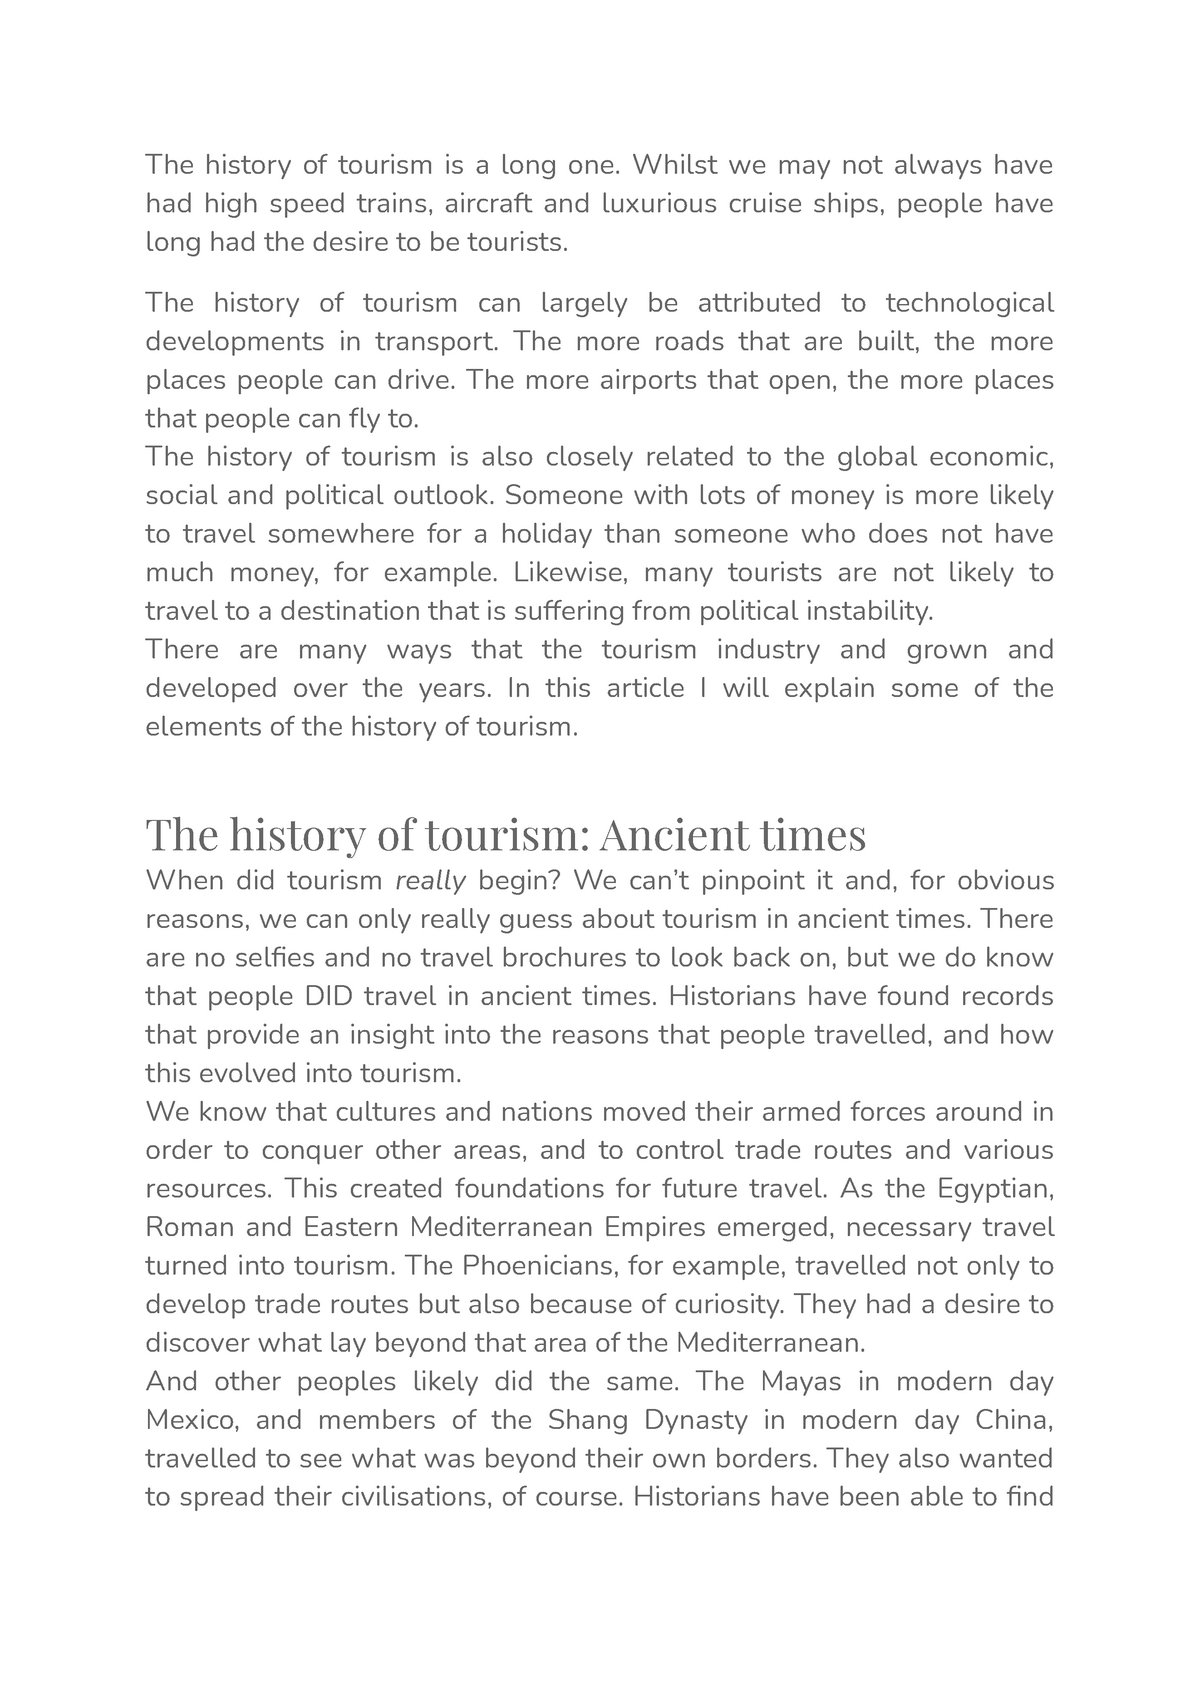 tourist history review